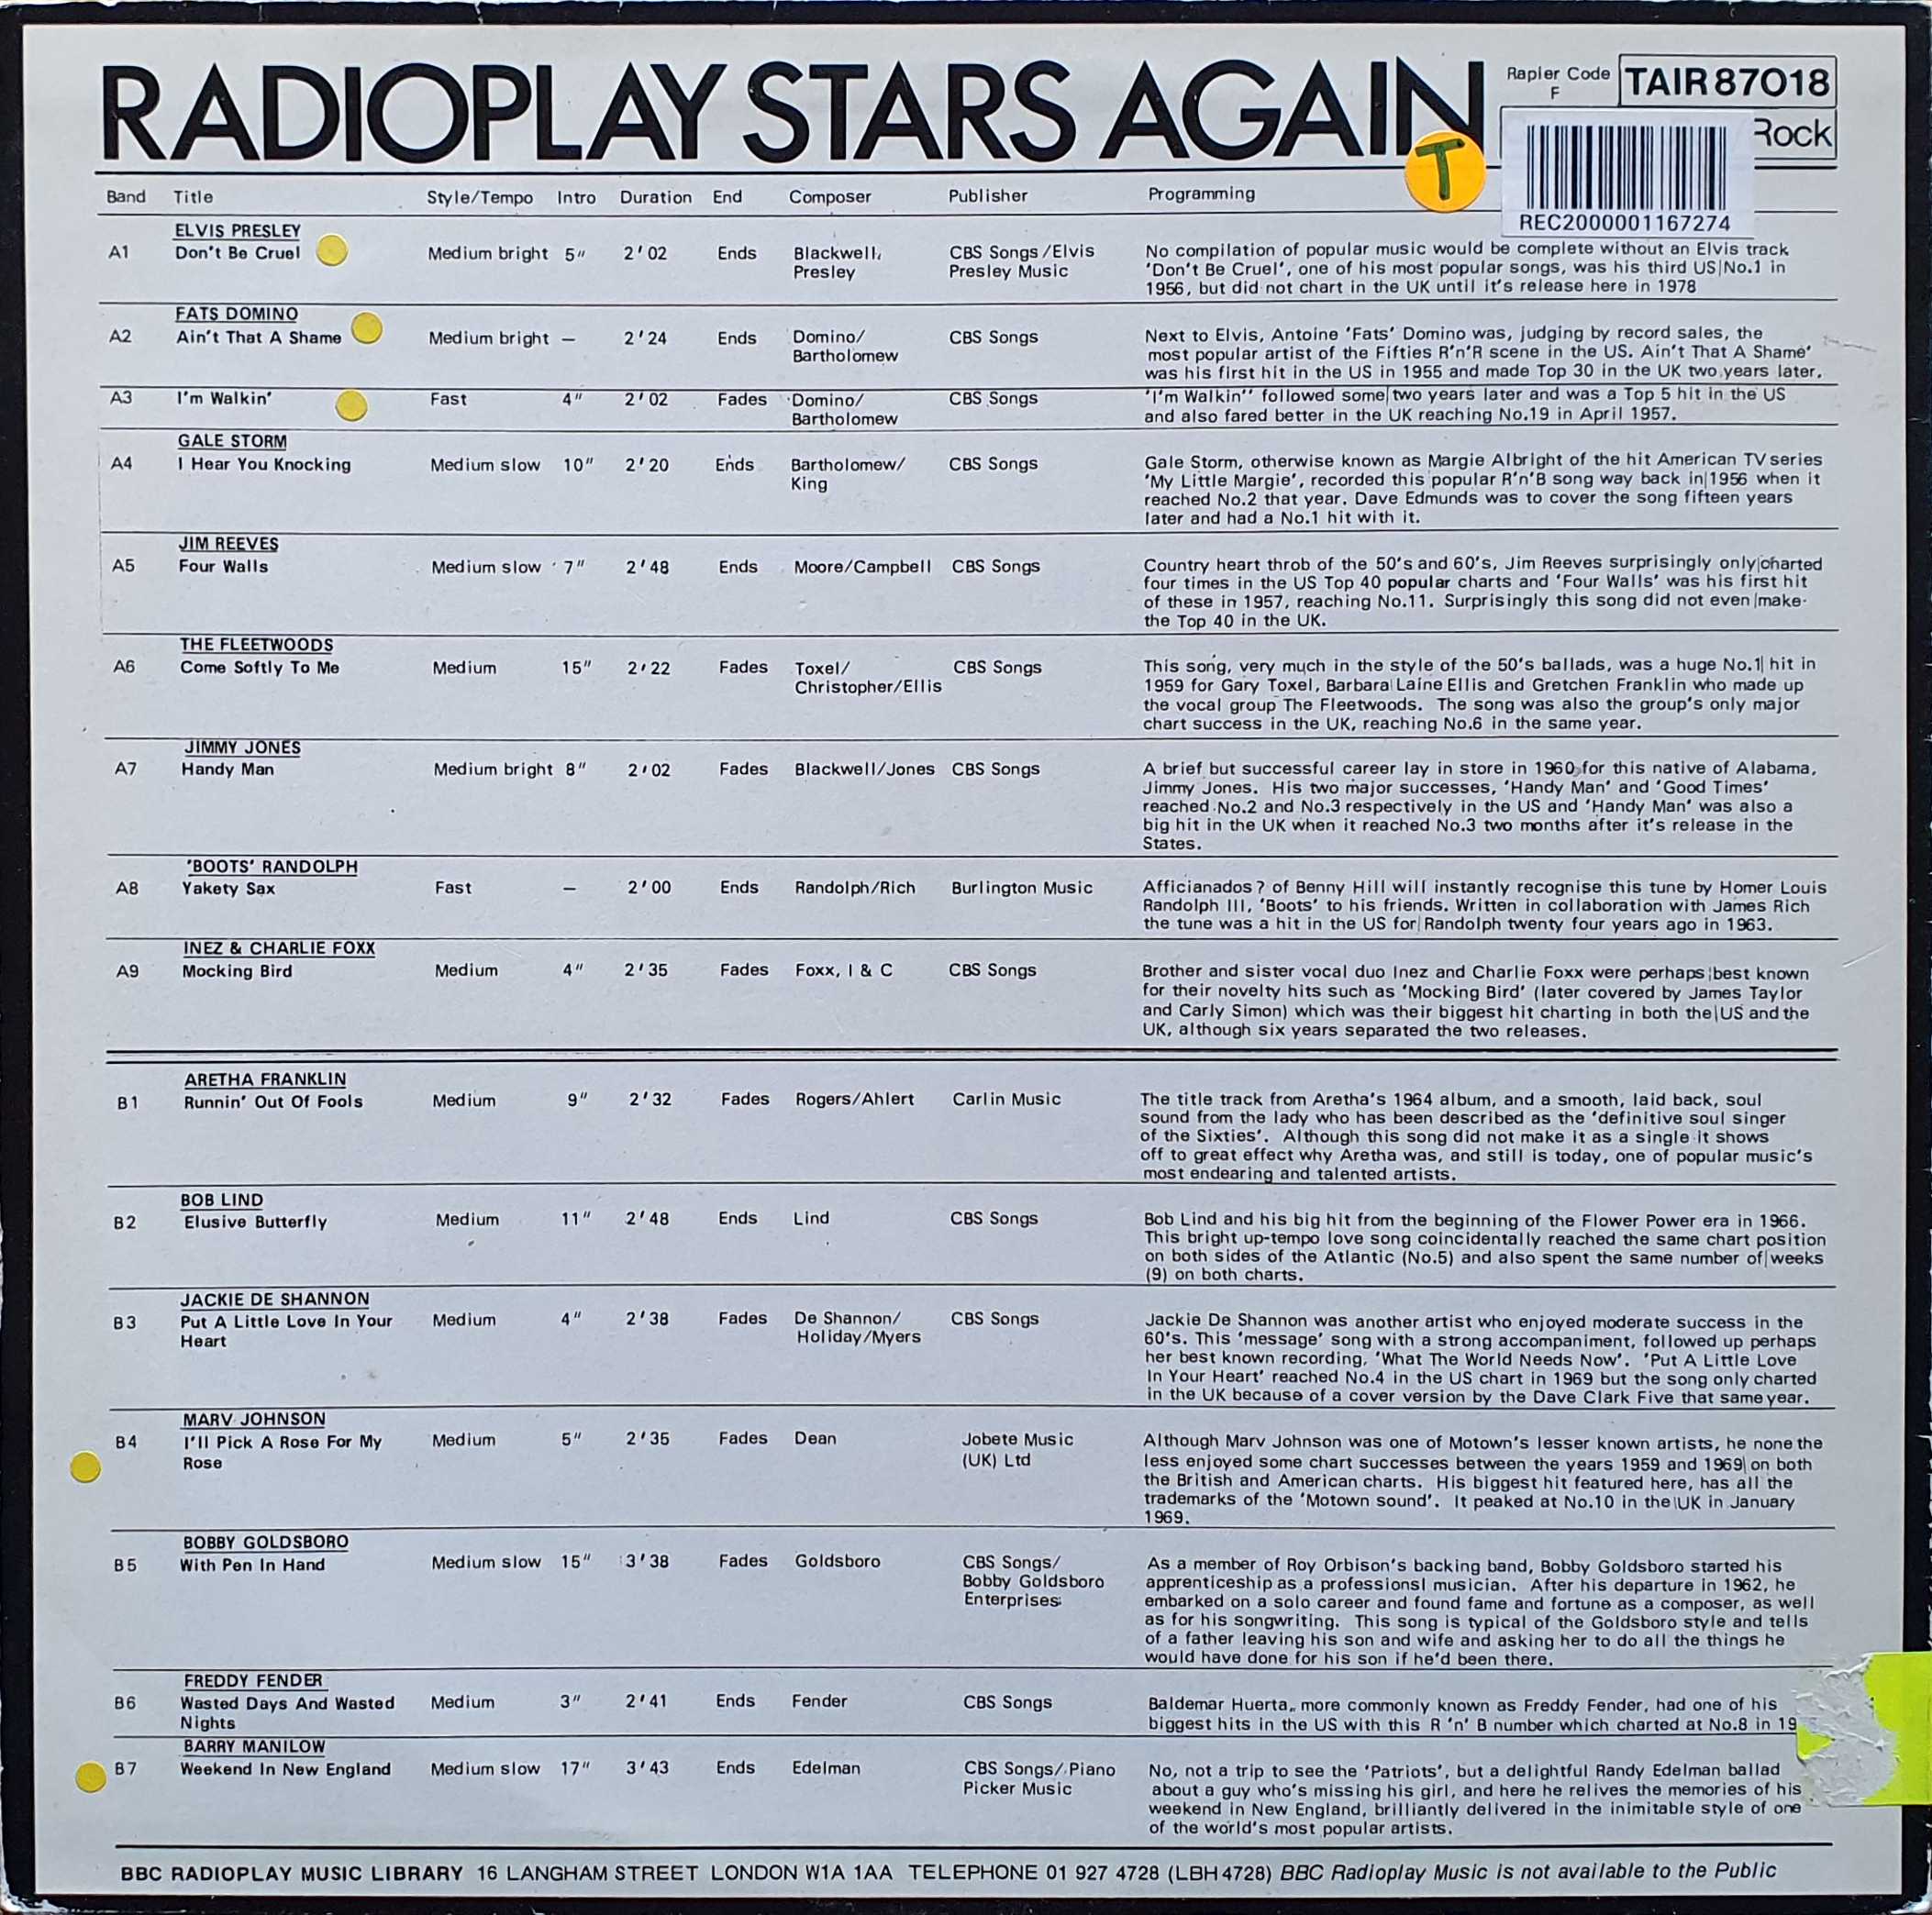 Picture of TAIR 87018 Radioplay stars again by artist Various from the BBC records and Tapes library